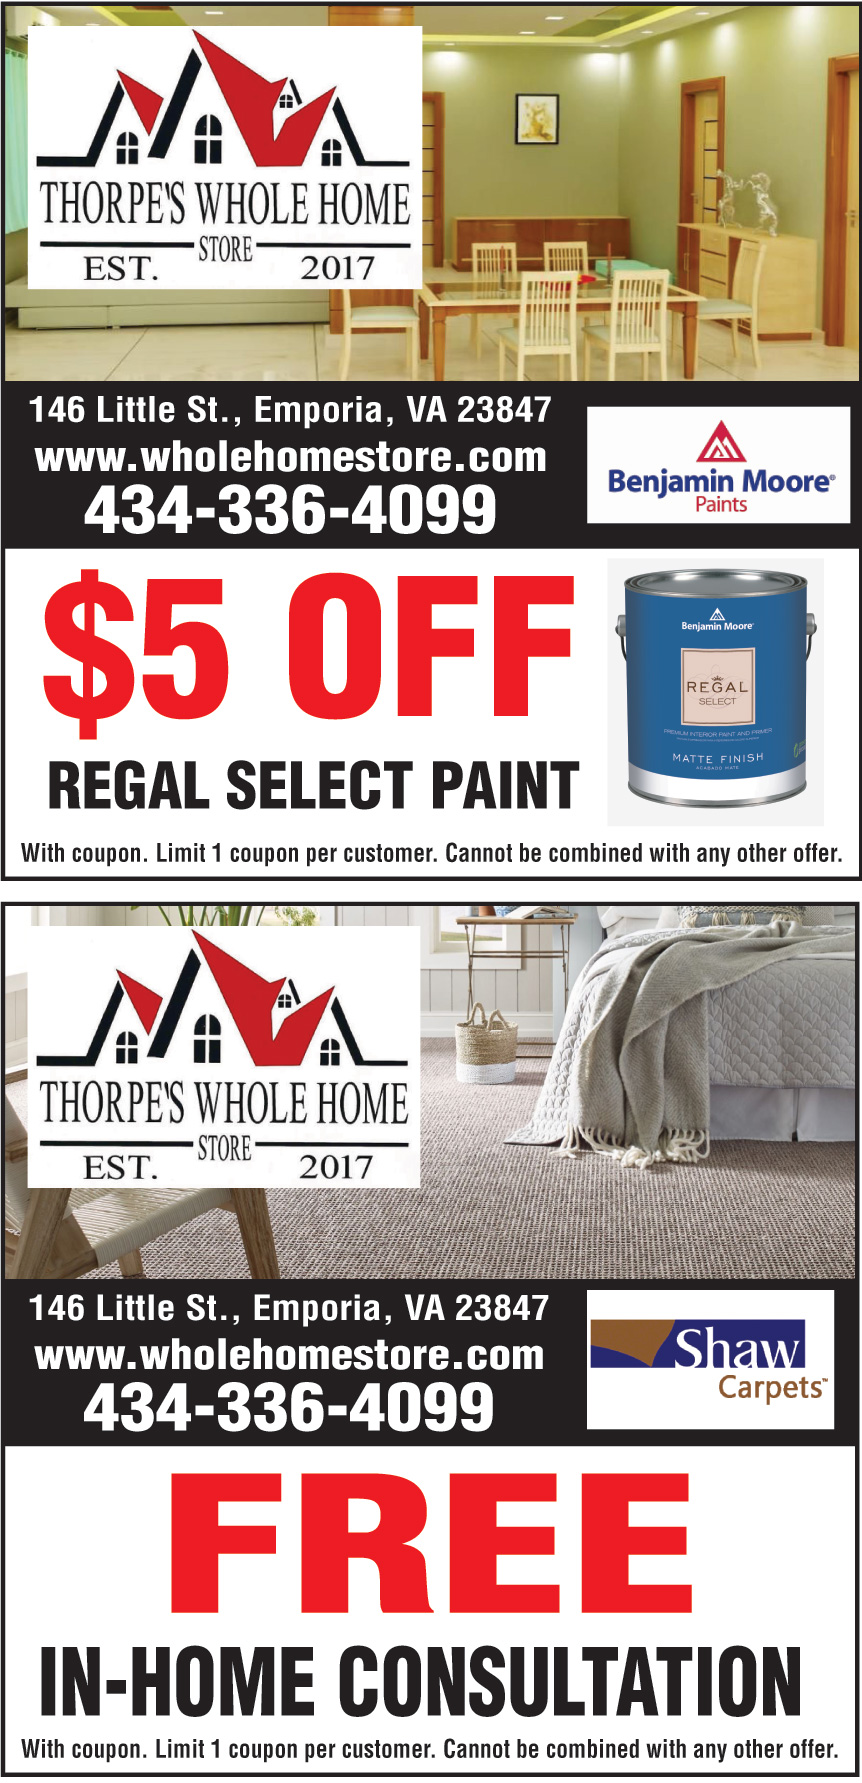 5 OFF ON REGAL SELECT PAINT Online Printable Coupons